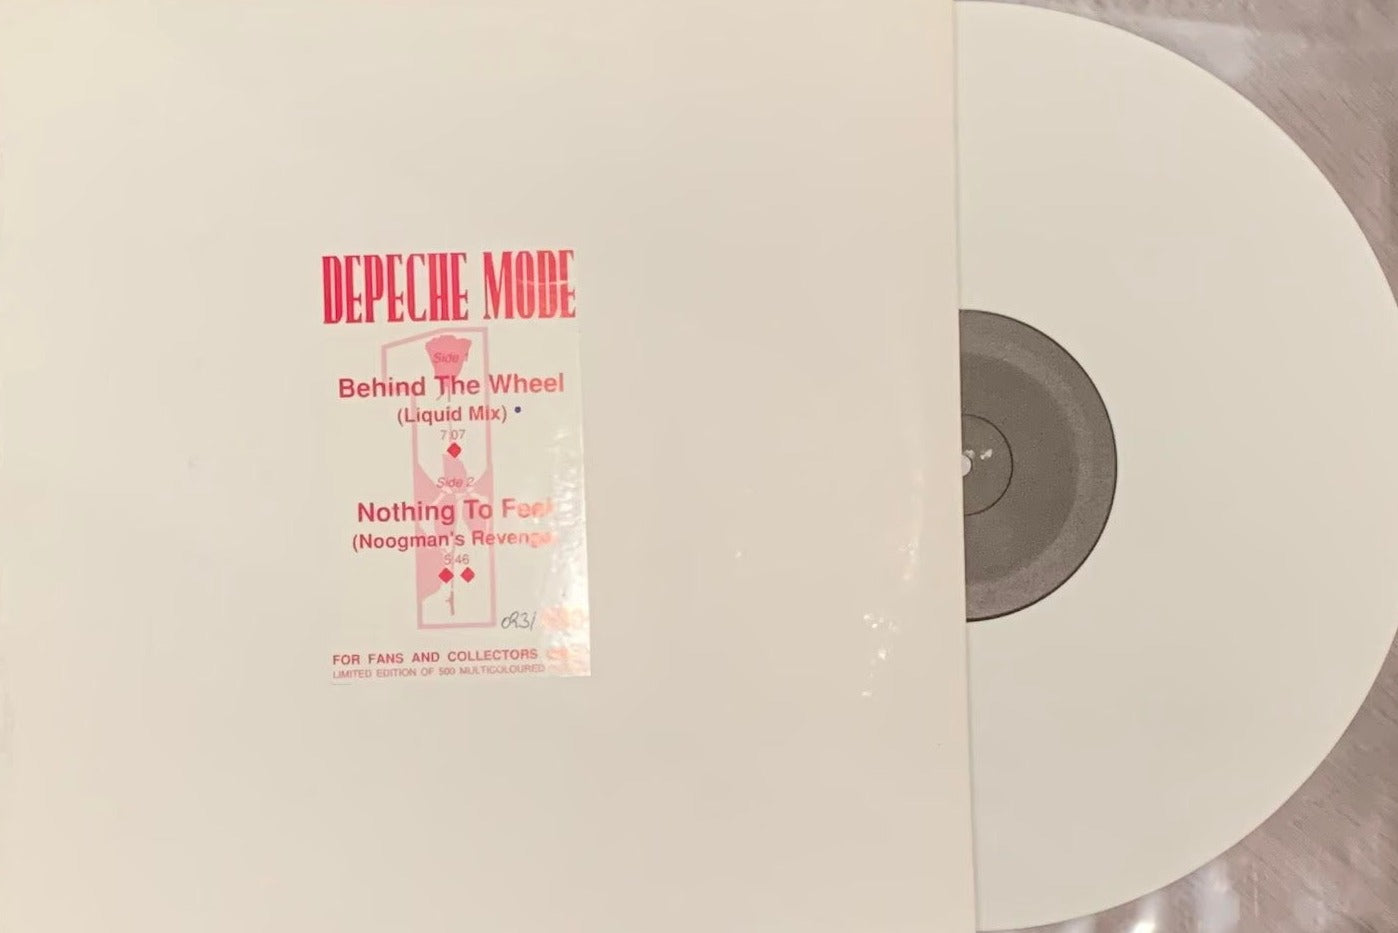 Depeche Mode-Behind the wheel/ Nothing to feel  (12", 45 RPM,  Limited Edition # 093/500)